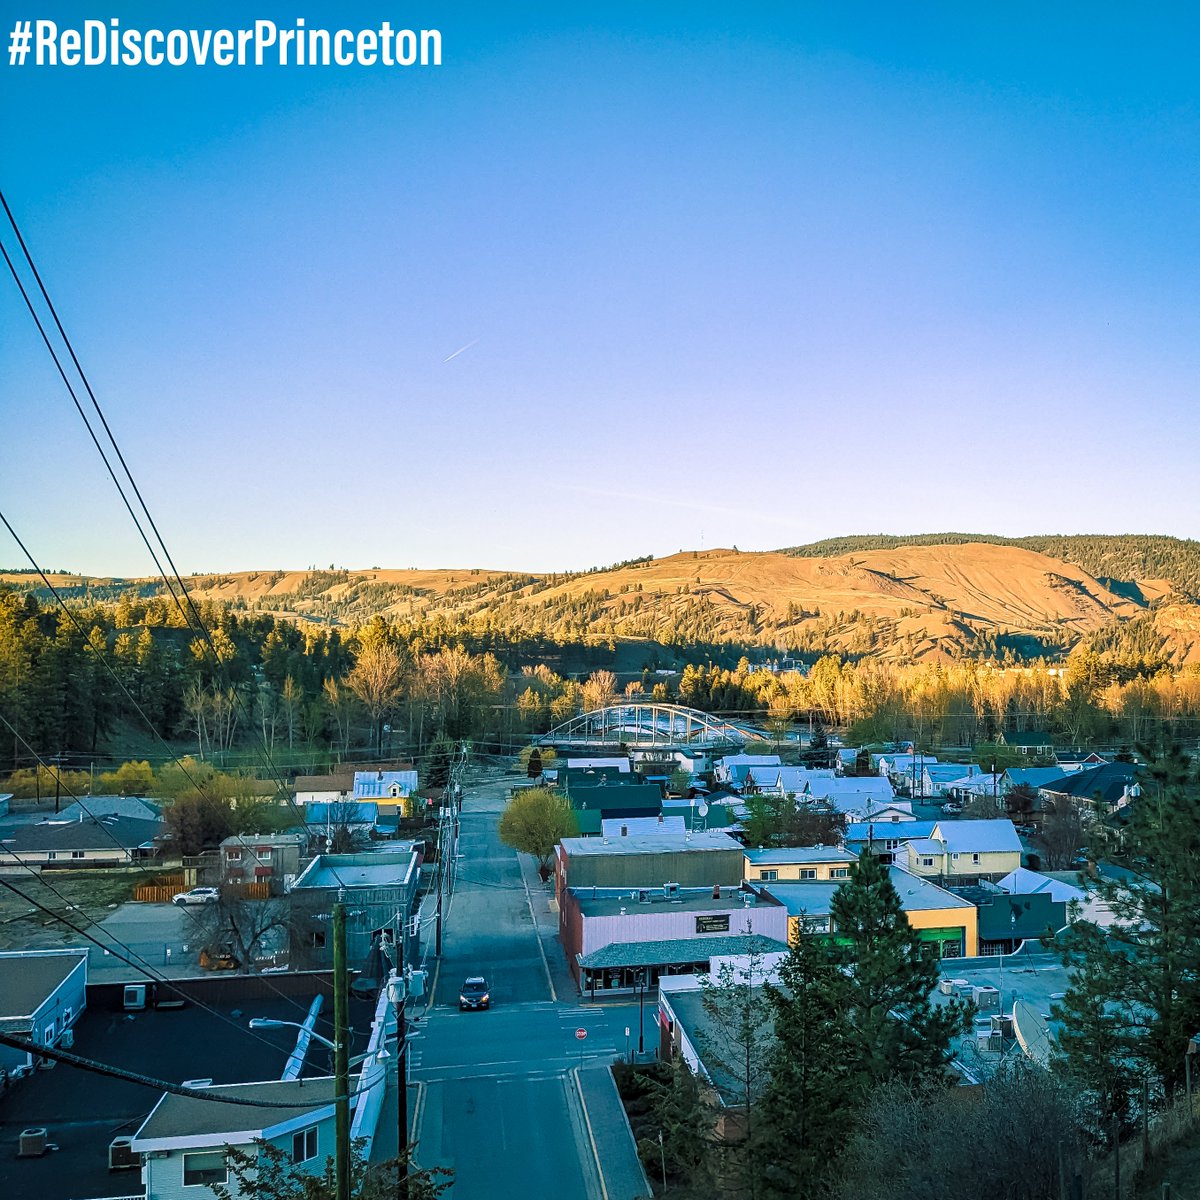 ✨🇨🇦 🌅Wow what a view check out the miners climb this spring and summer if you want to get your steps in. Or if you're looking for some fun fitness adventures; or just to soak in the majestic view. ☀️✨

#townofprincetonbc #rediscoverprinceton